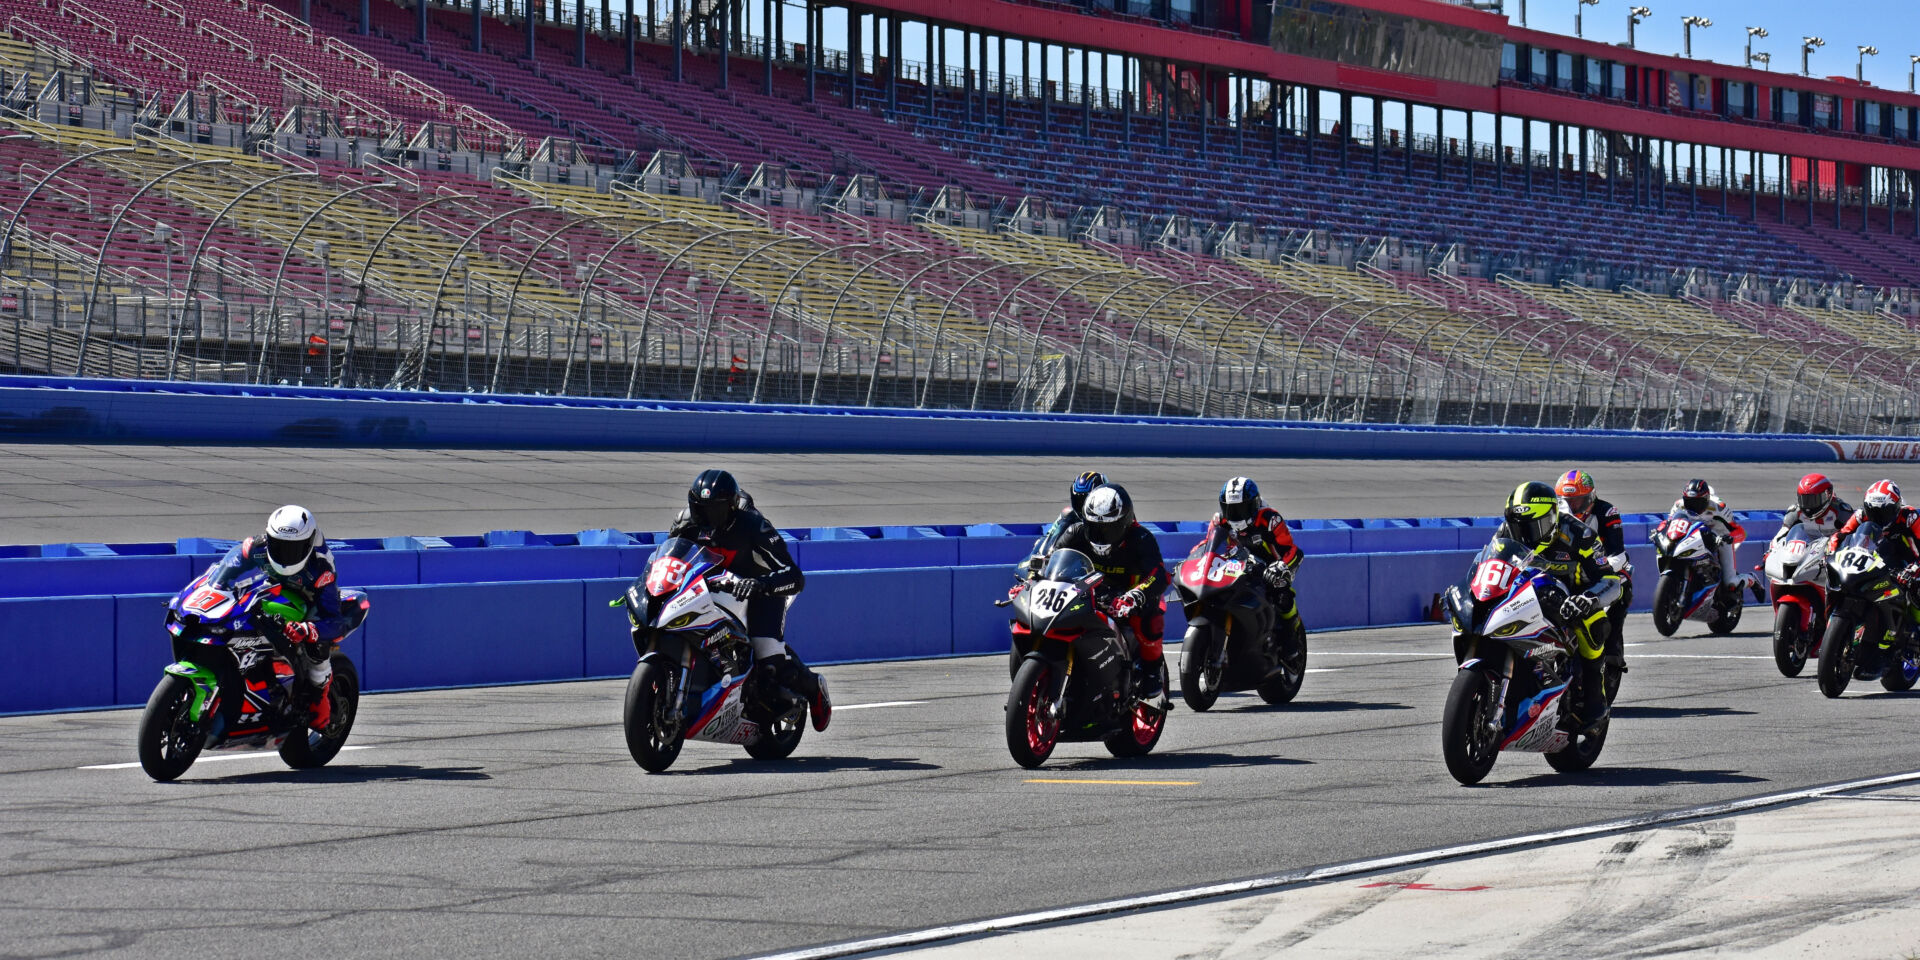 Edgar Zaragoza (27) leads Terry Heard (153), Dexter Stuart (246), Sahar Zvik (161), Fatih Buyuksonmez (38) and the rest coming off the grid at the start of the A Superstock race at Auto Club Speedway. Photo by Michael Gougis.